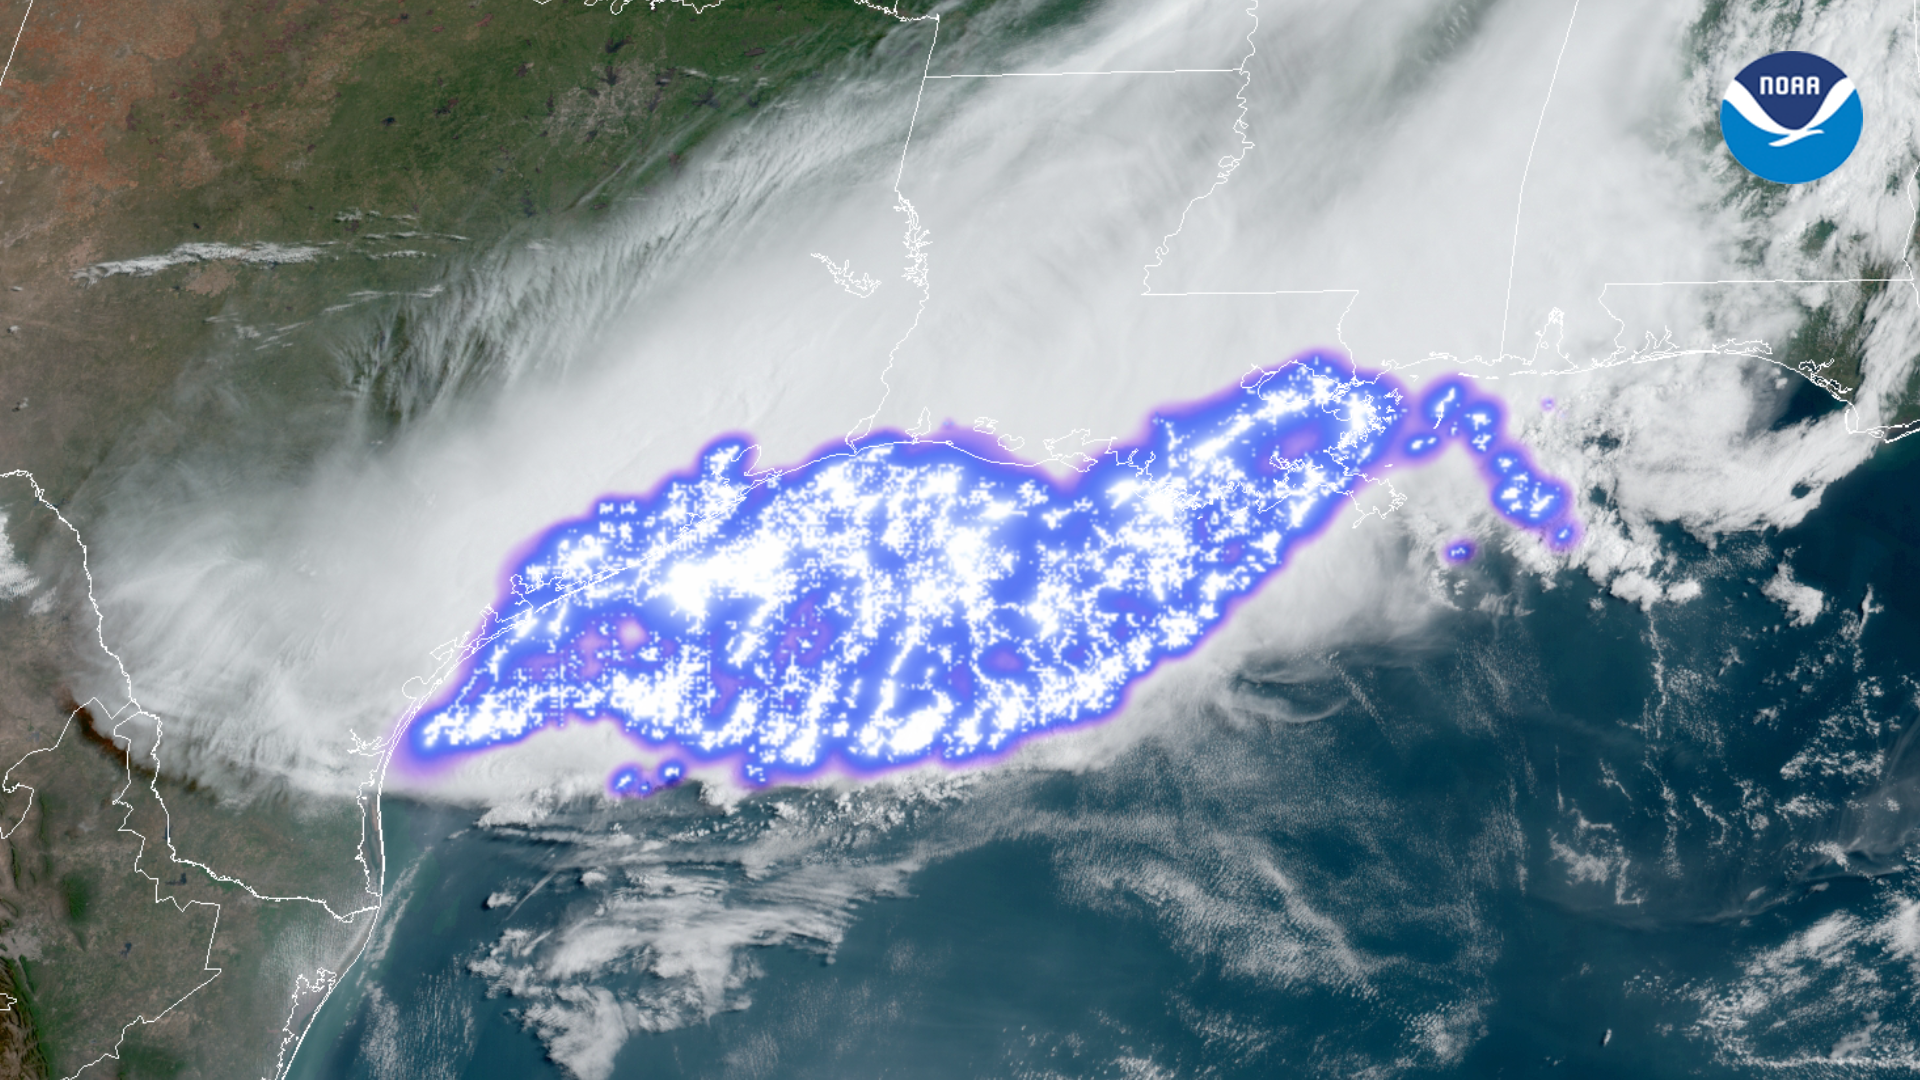 An image of the storms that produced the longest lightning flash capture by a NOAA satellite from April 29, 2020.